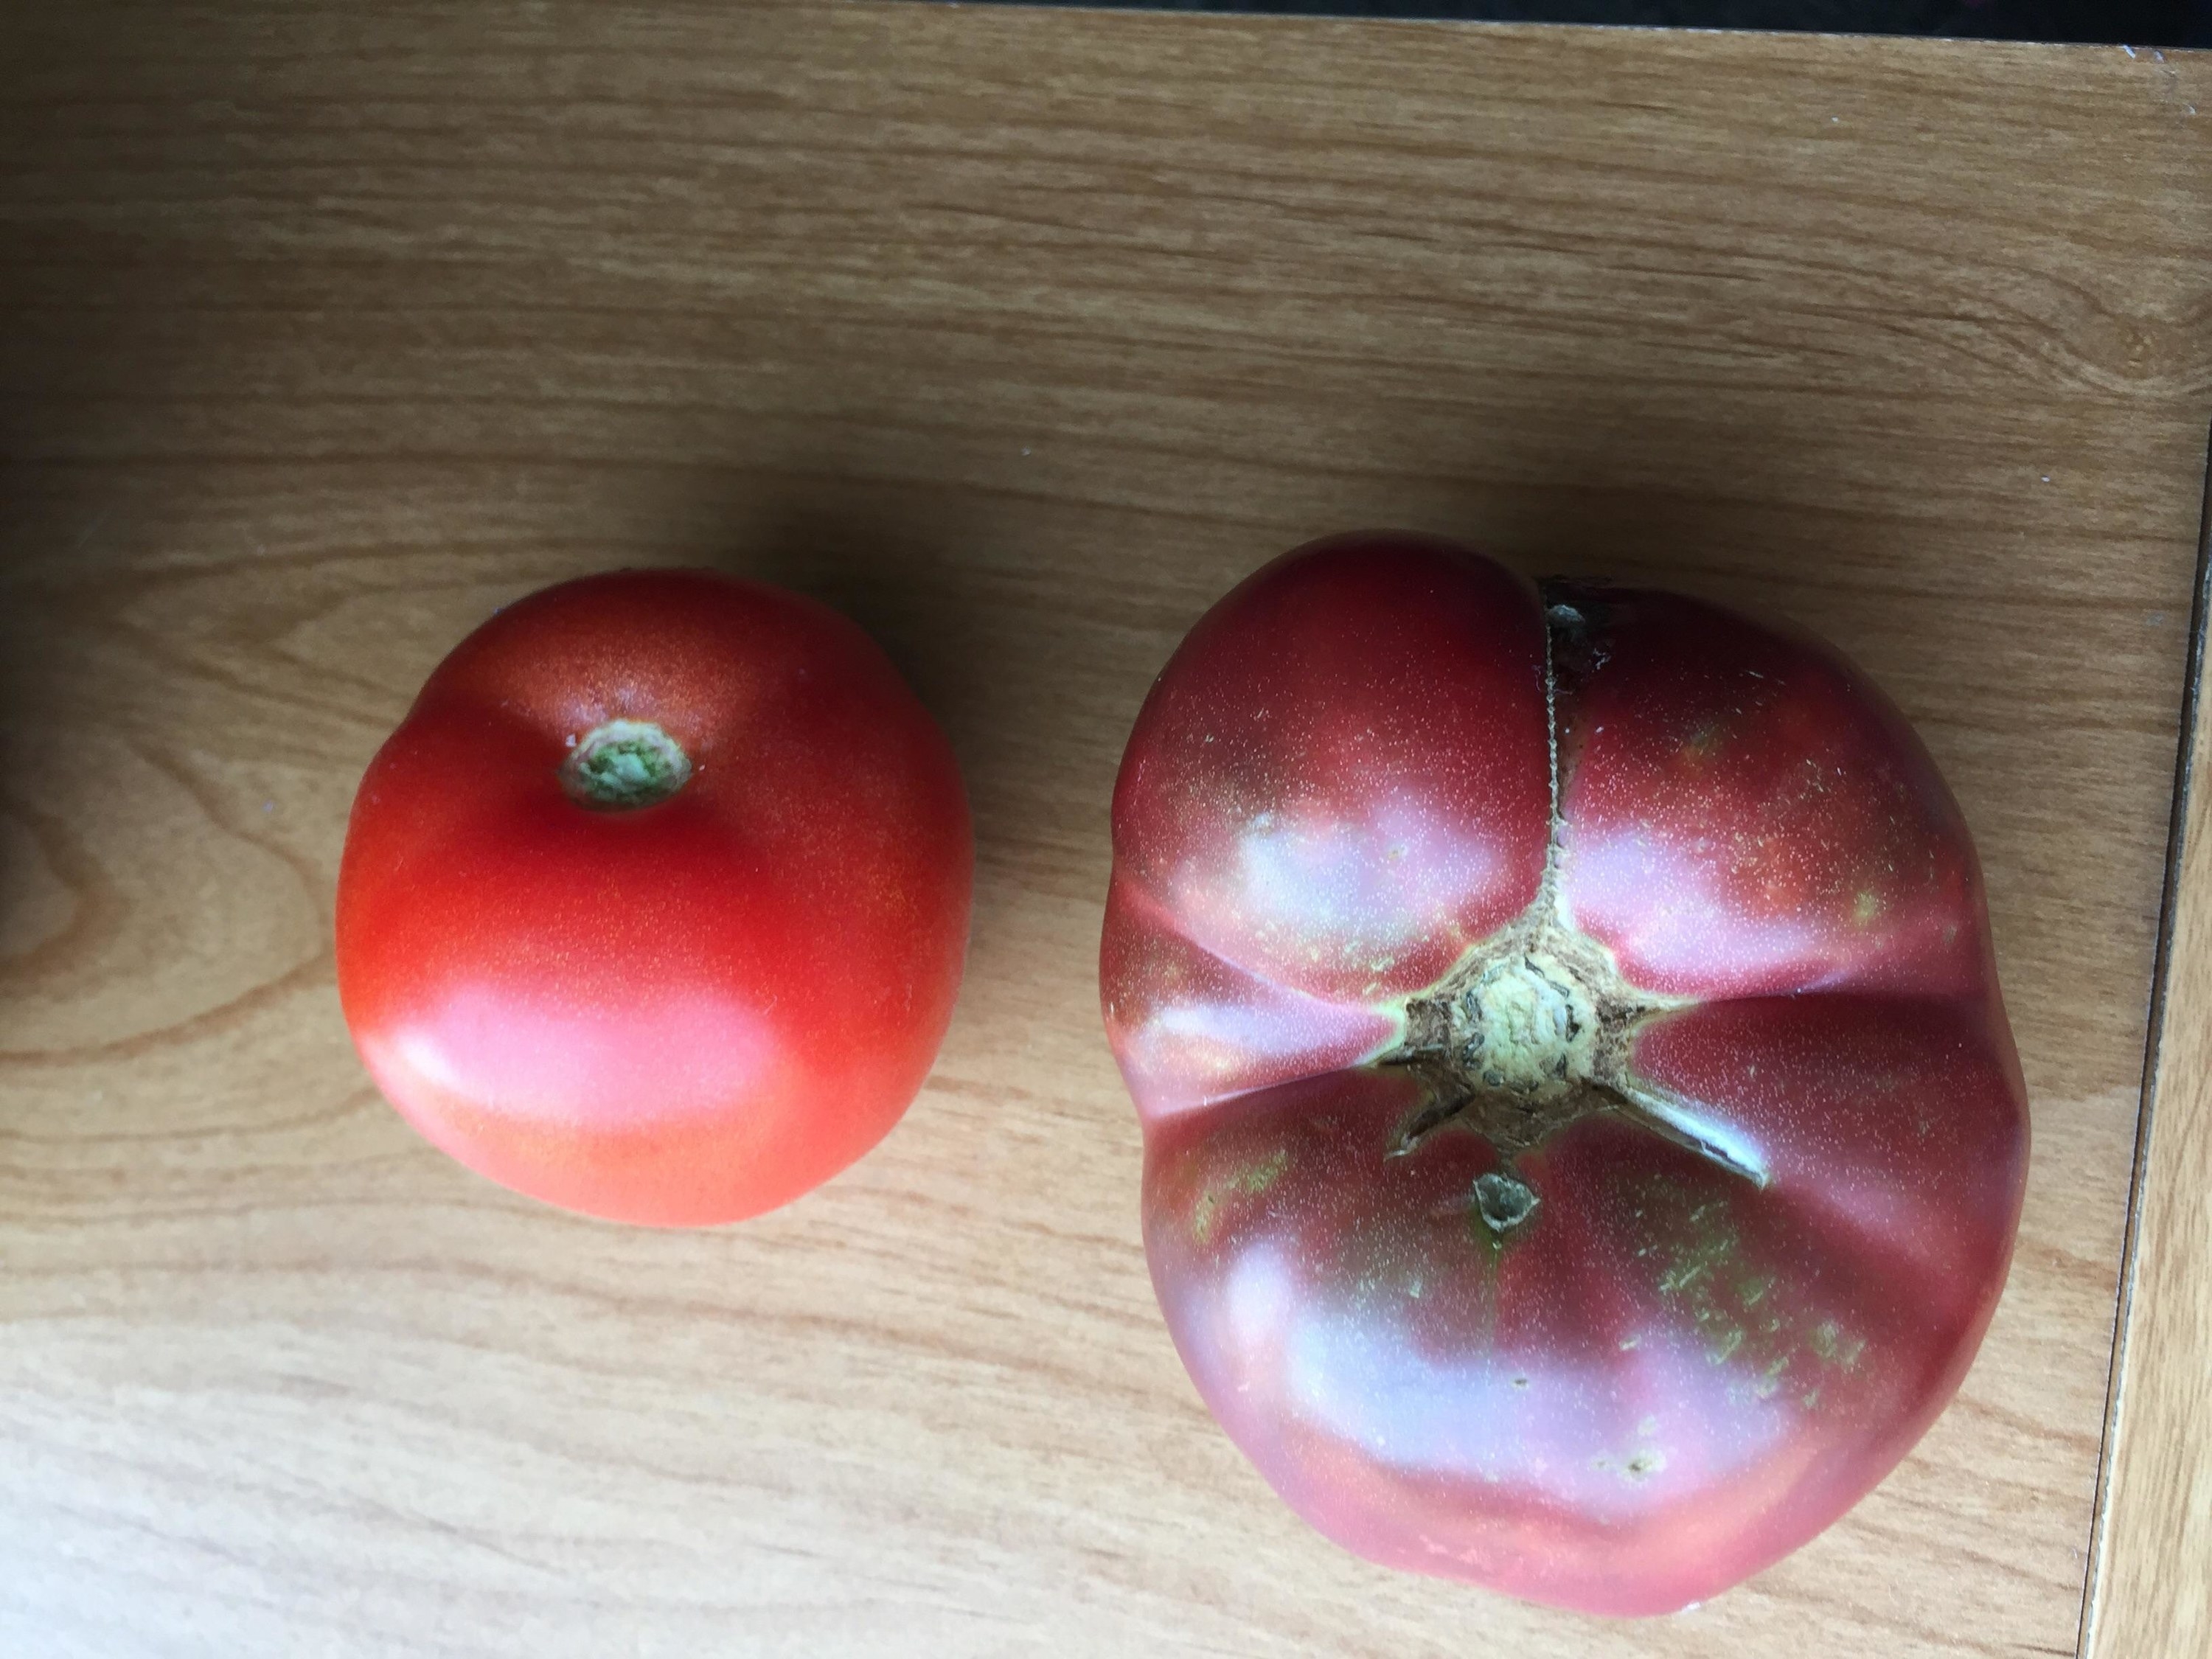 Comparing new and old tomatoes